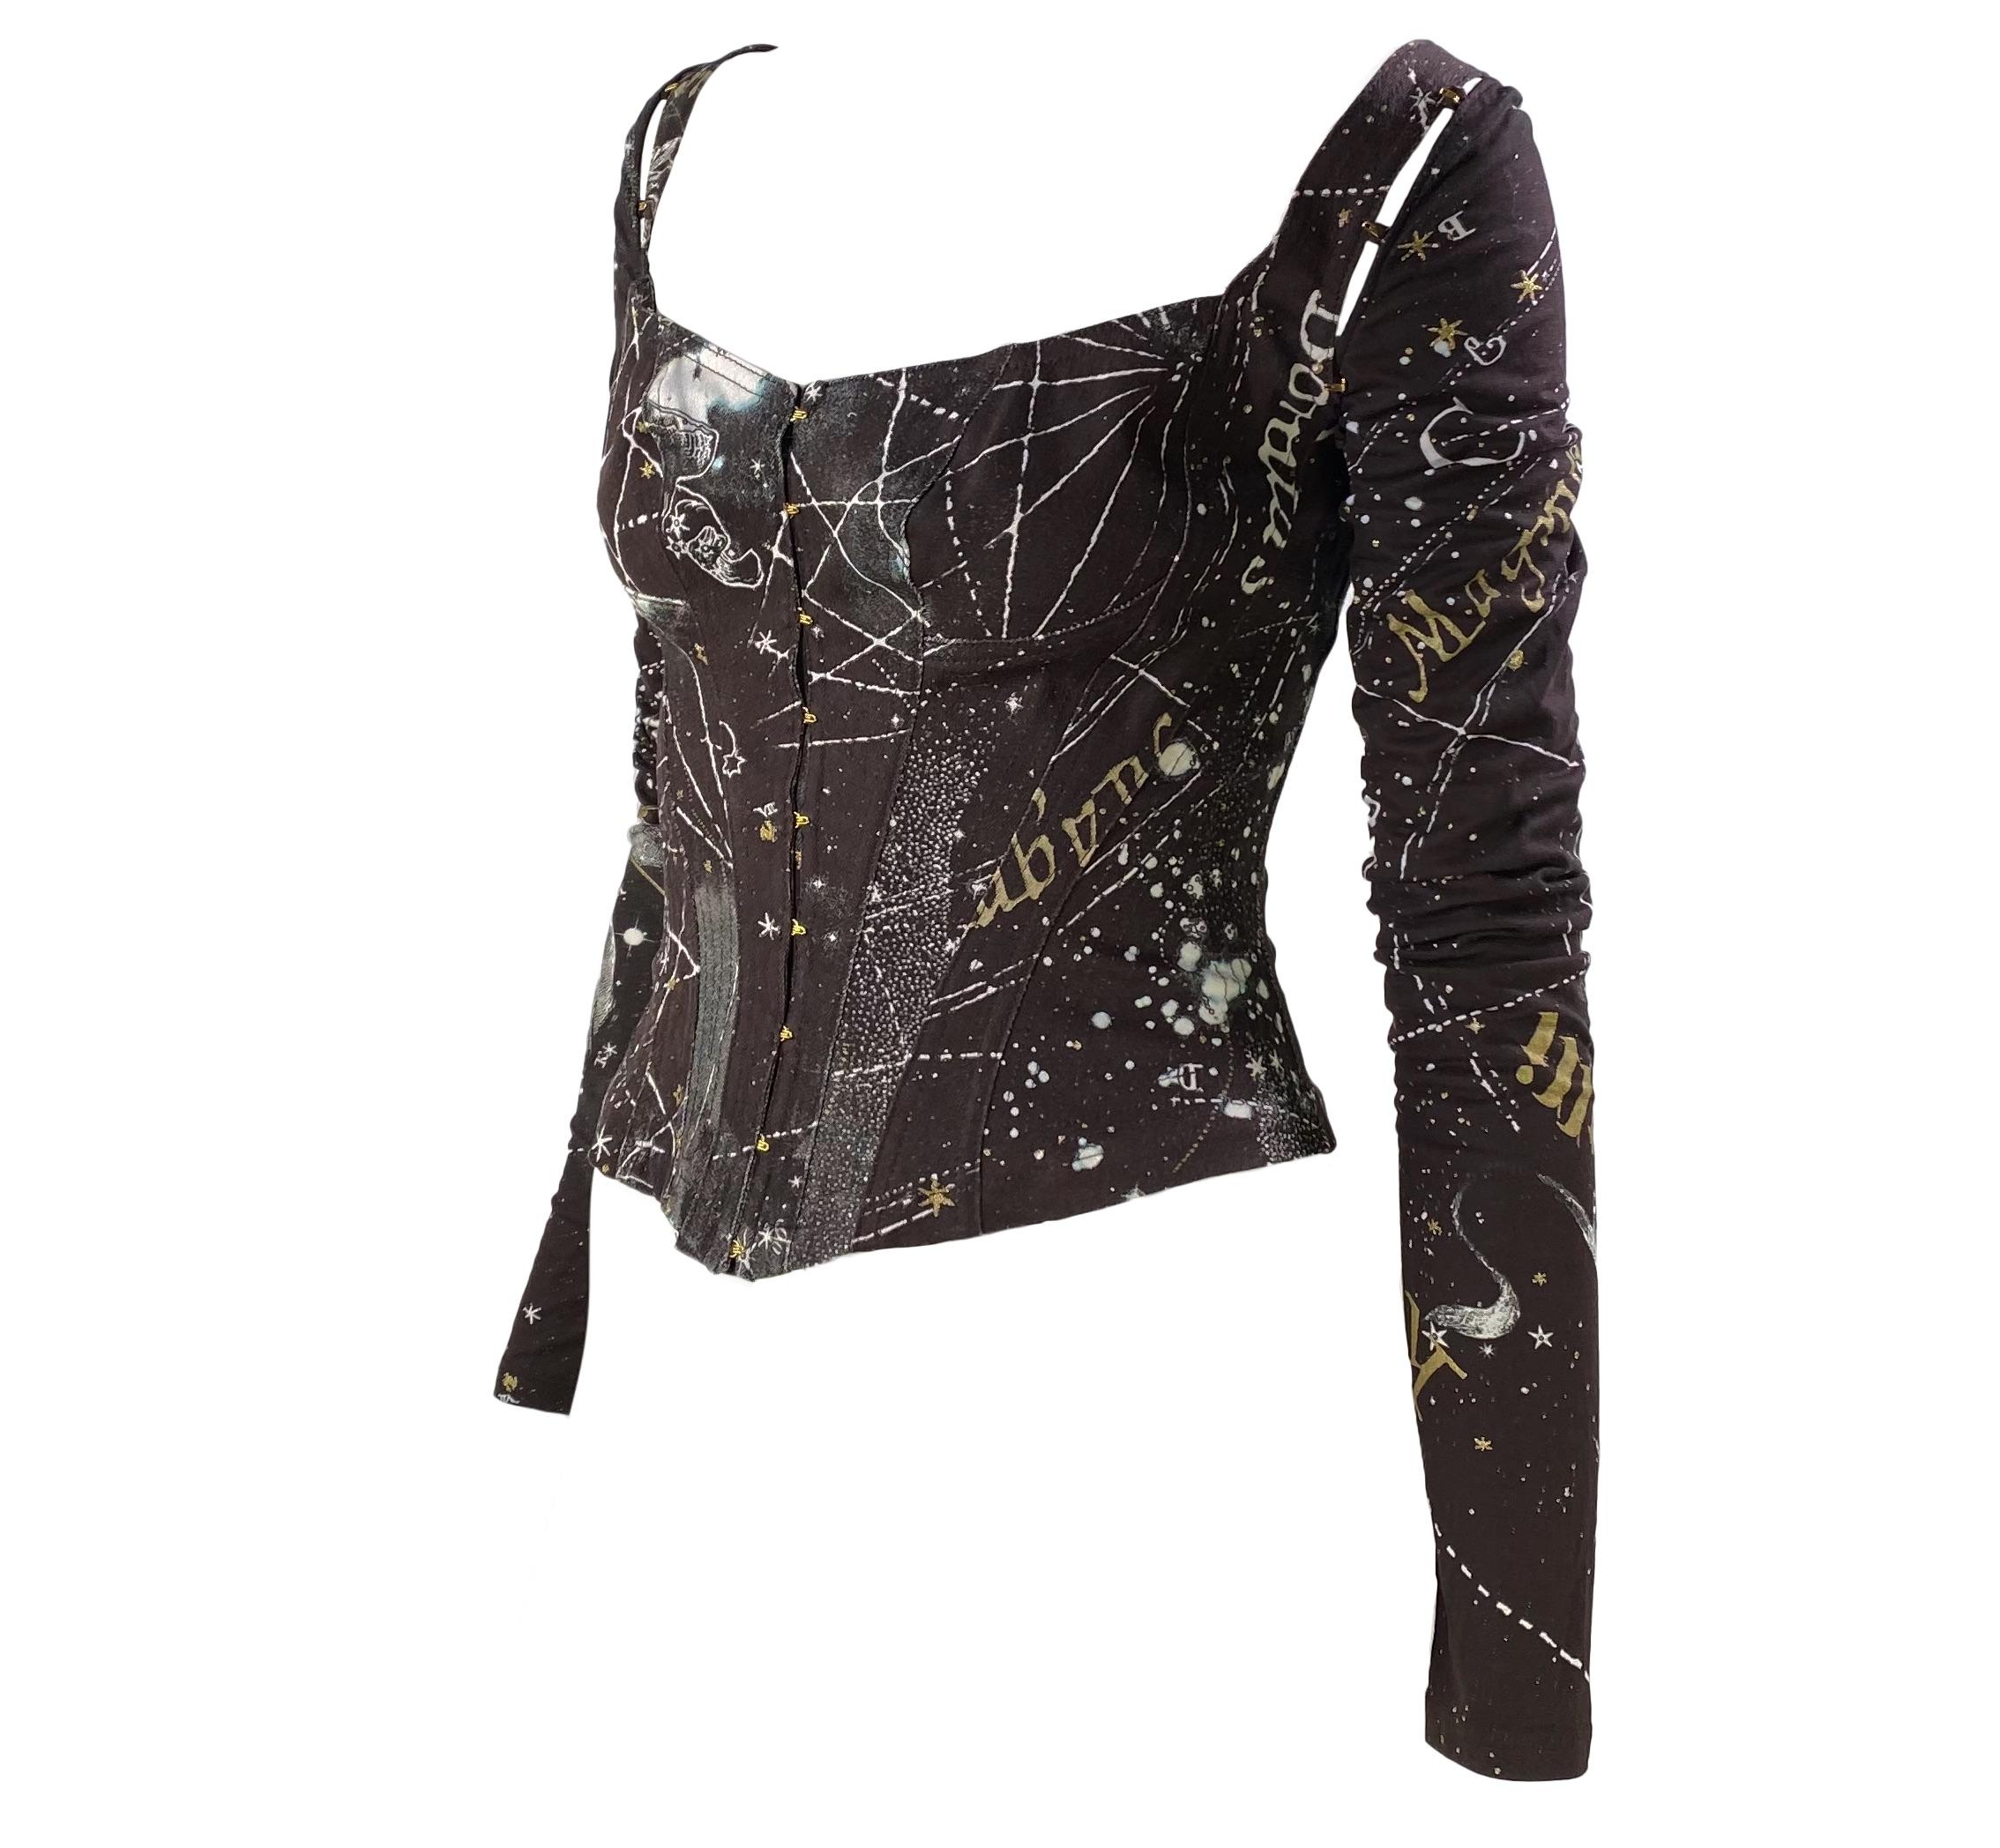 Presenting a stunning astrology print corseted top, designed by Roberto Cavalli. From 2003, this sought after print features constellations and depicts some of the horoscope signs. The versatile top can be worn with the attached long sleeves or they